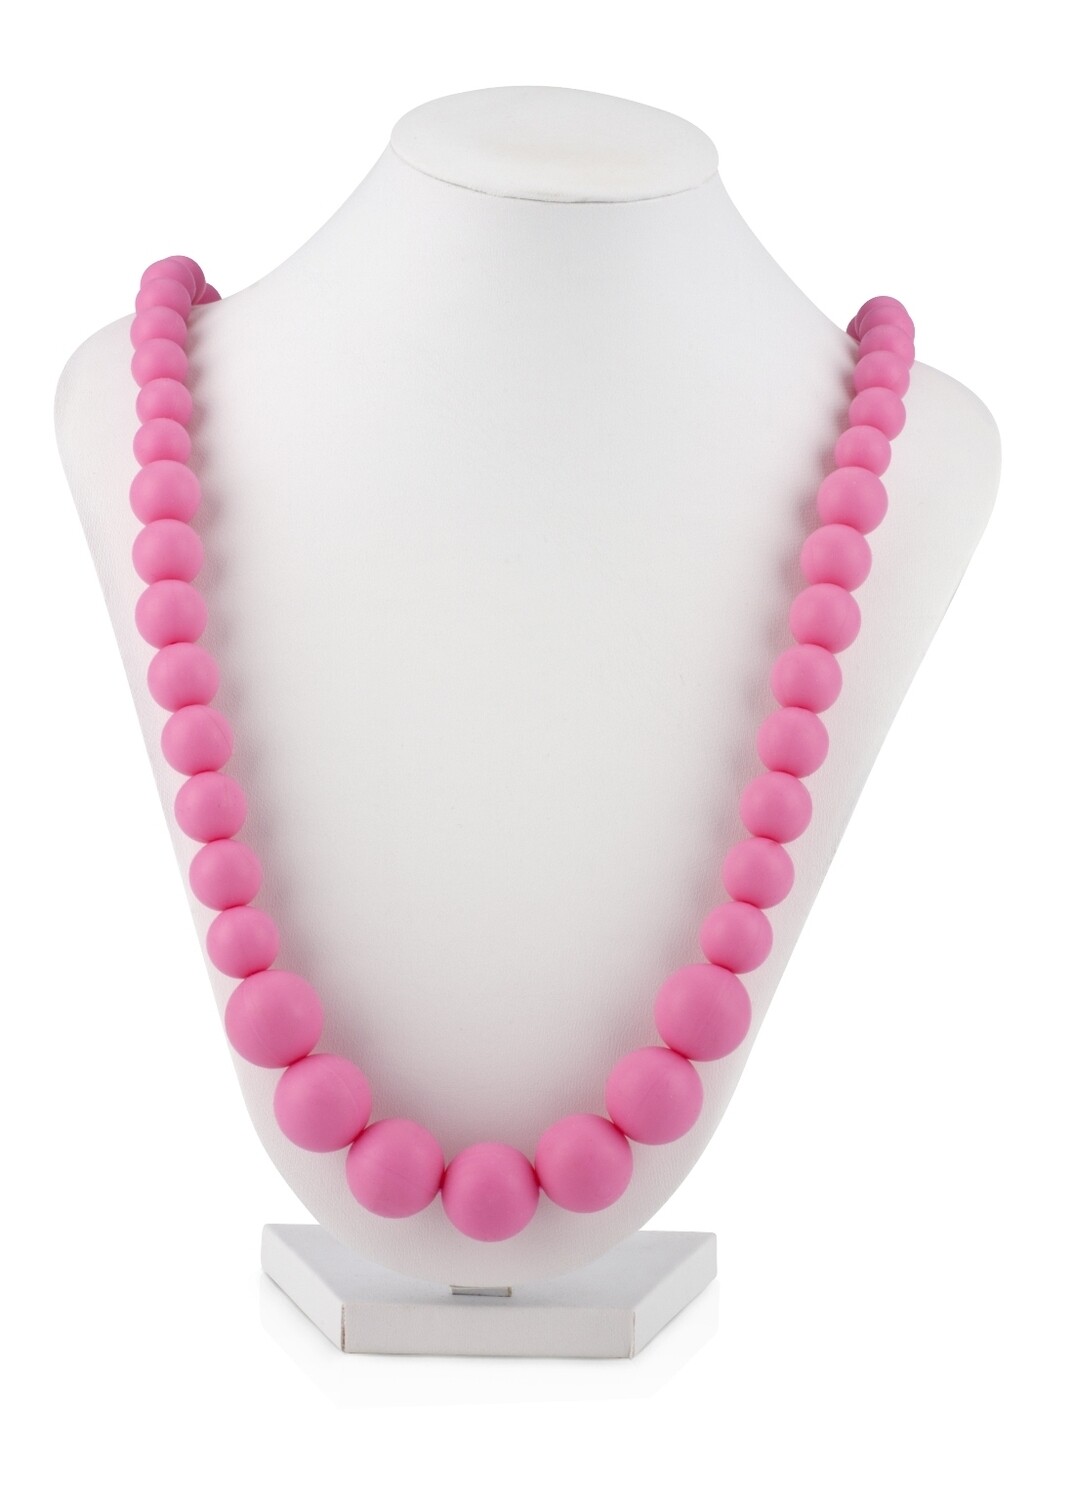 . Case of [12] Nuby Round Beads Teething Necklaces - Pink, 29.5" .